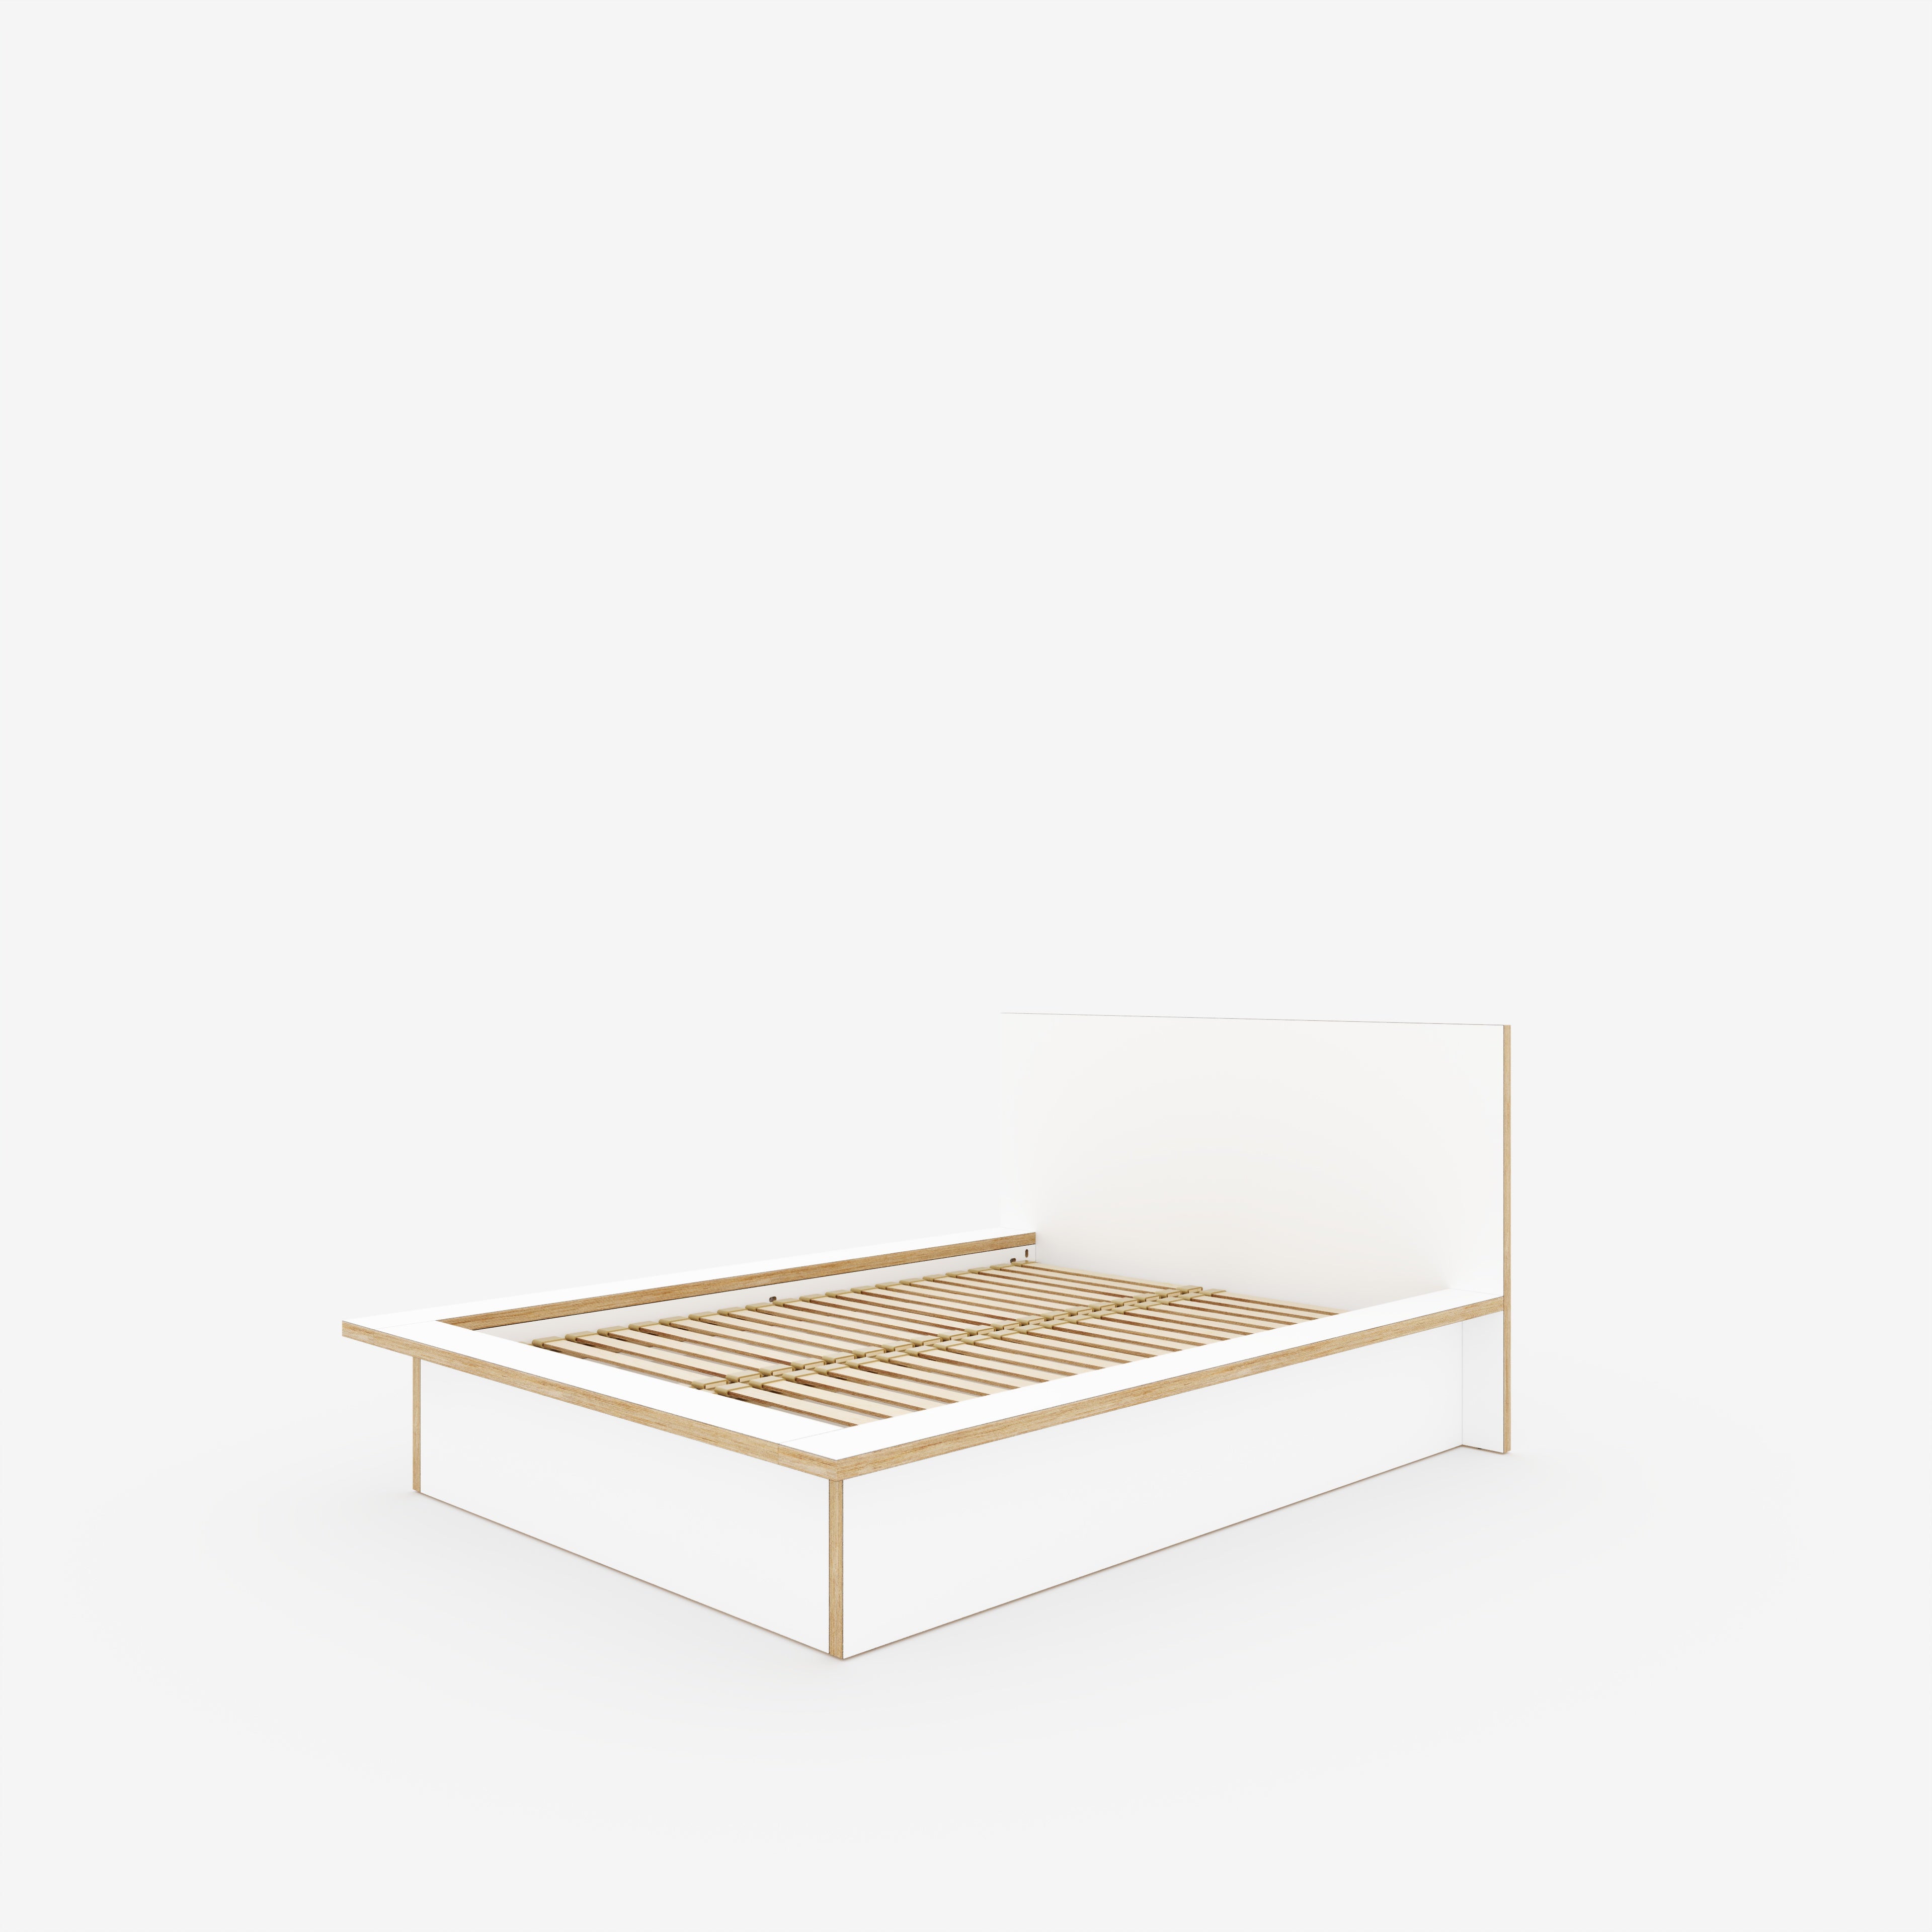 Plywood Platform Bed - Plywood Formica White - European Double 1400(w) x 2000(d) High